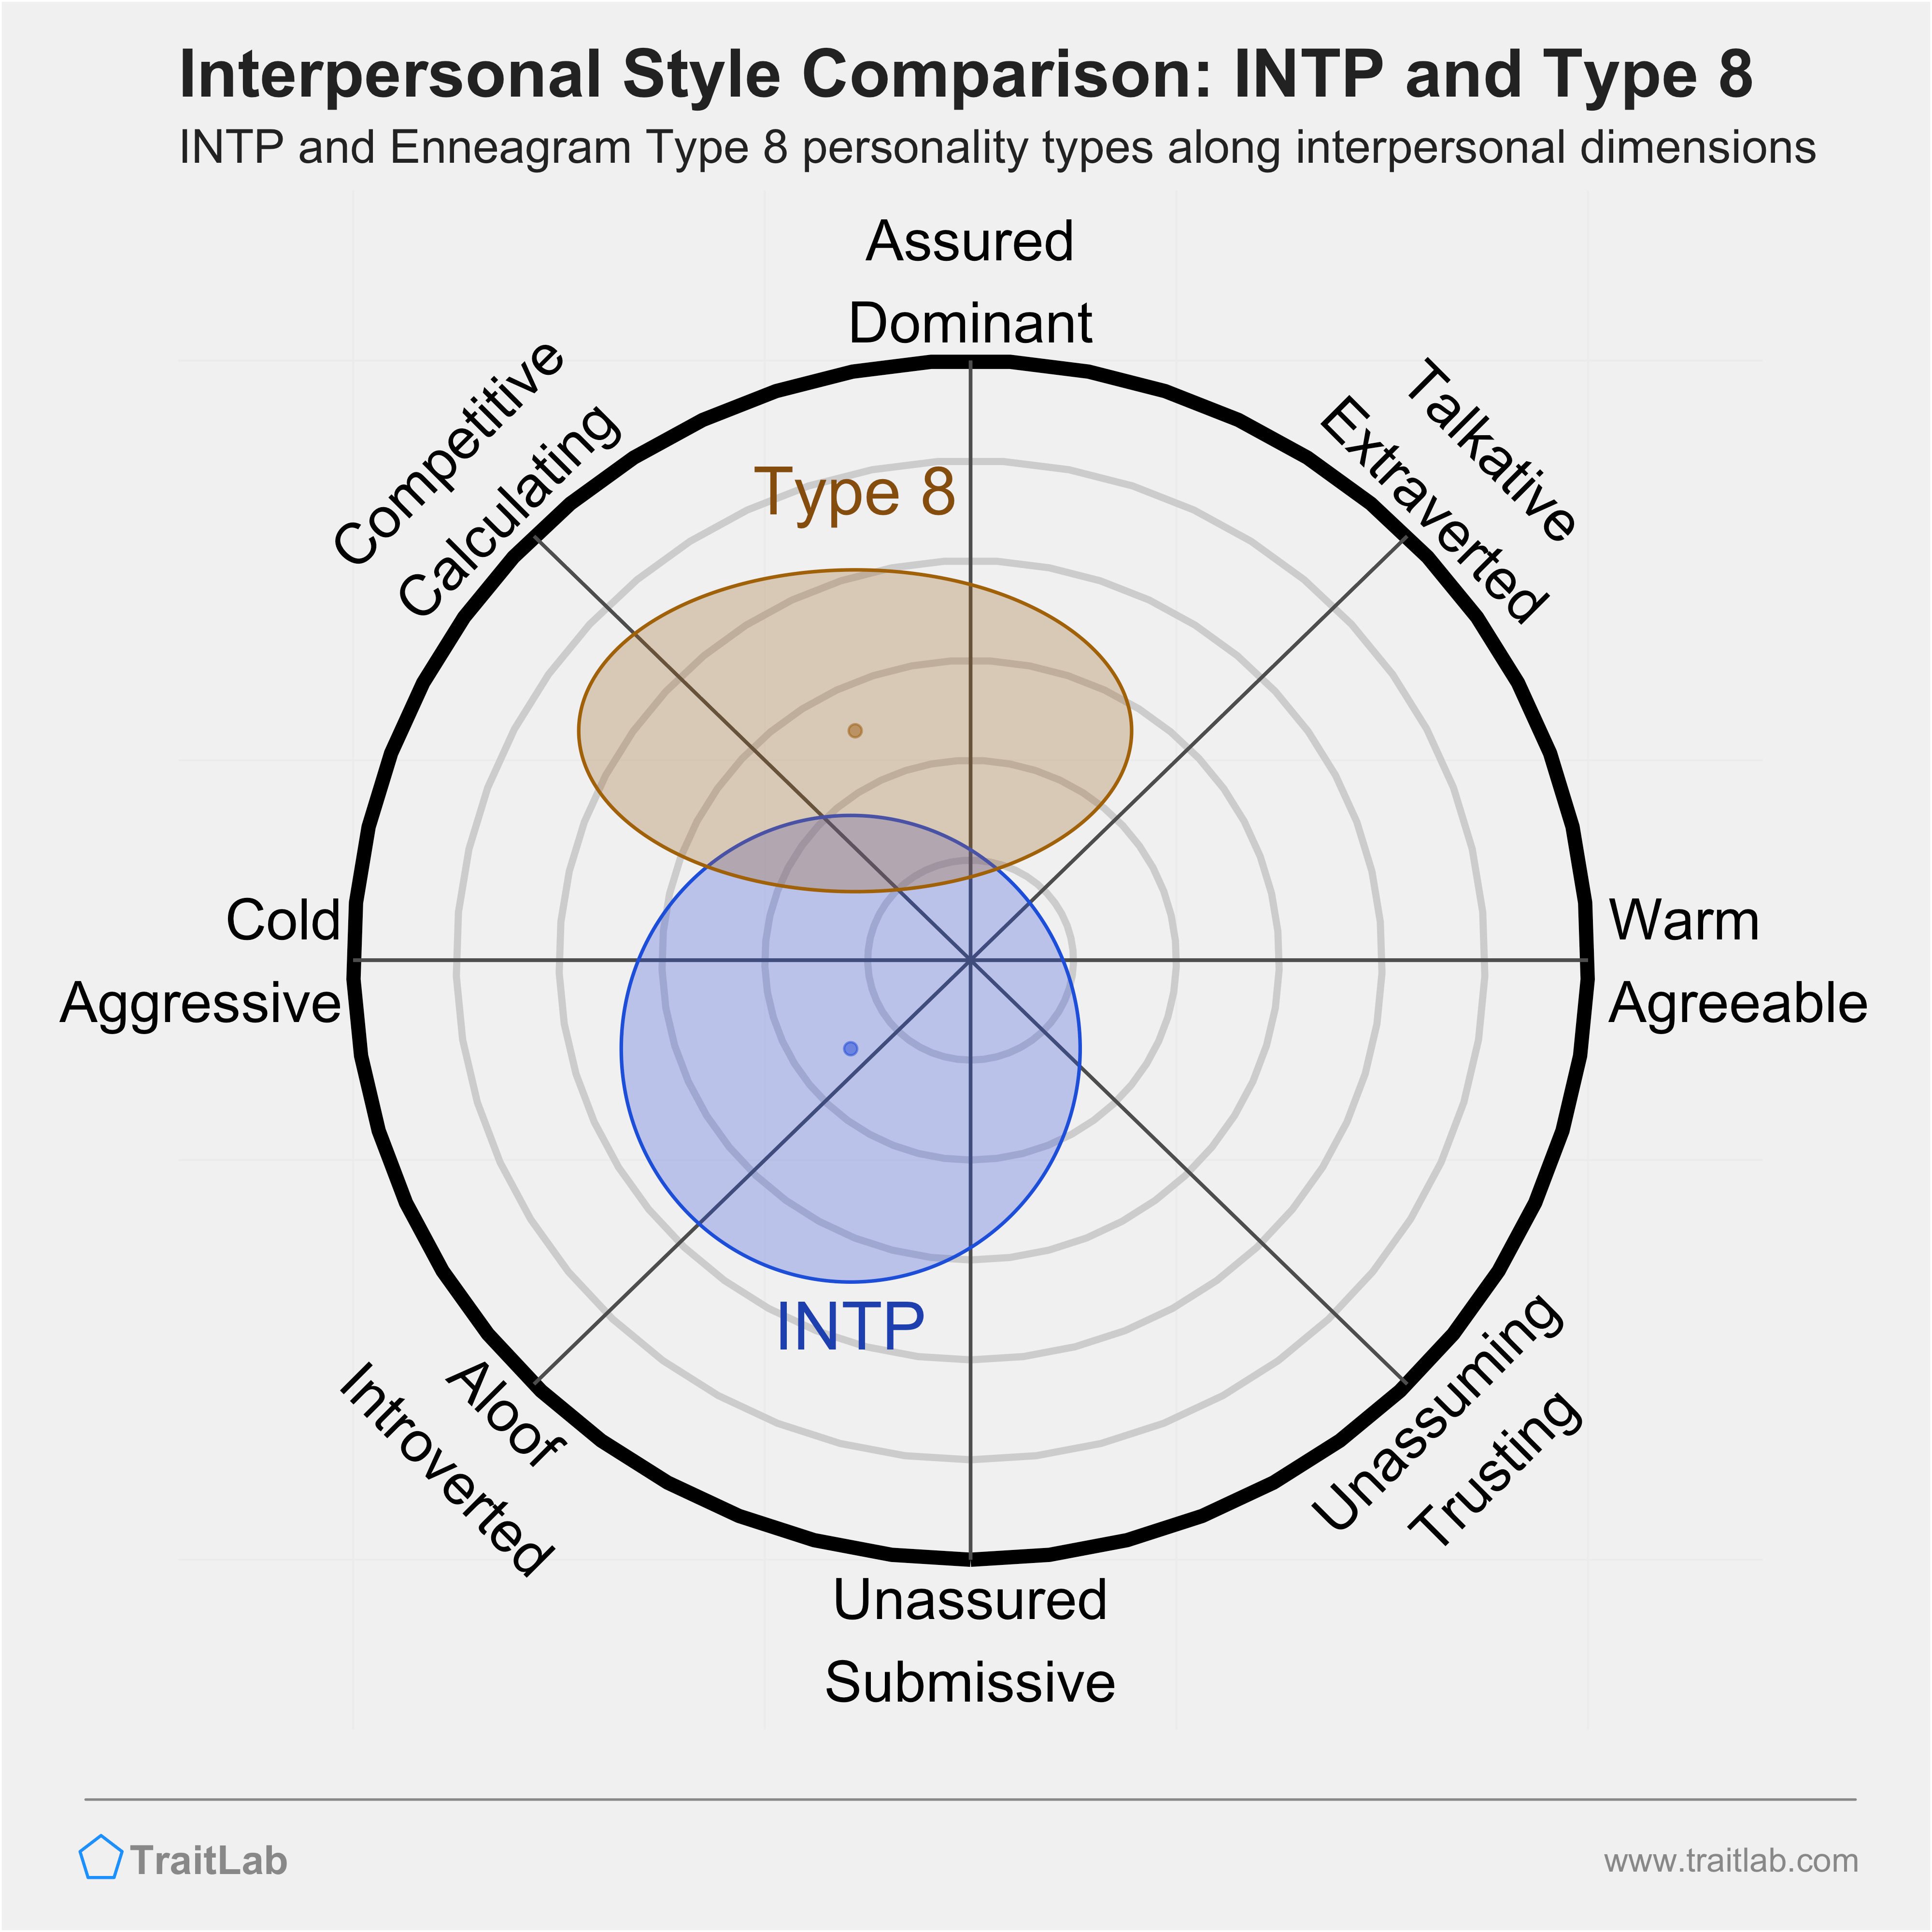 Enneagram INTP and Type 8 comparison across interpersonal dimensions